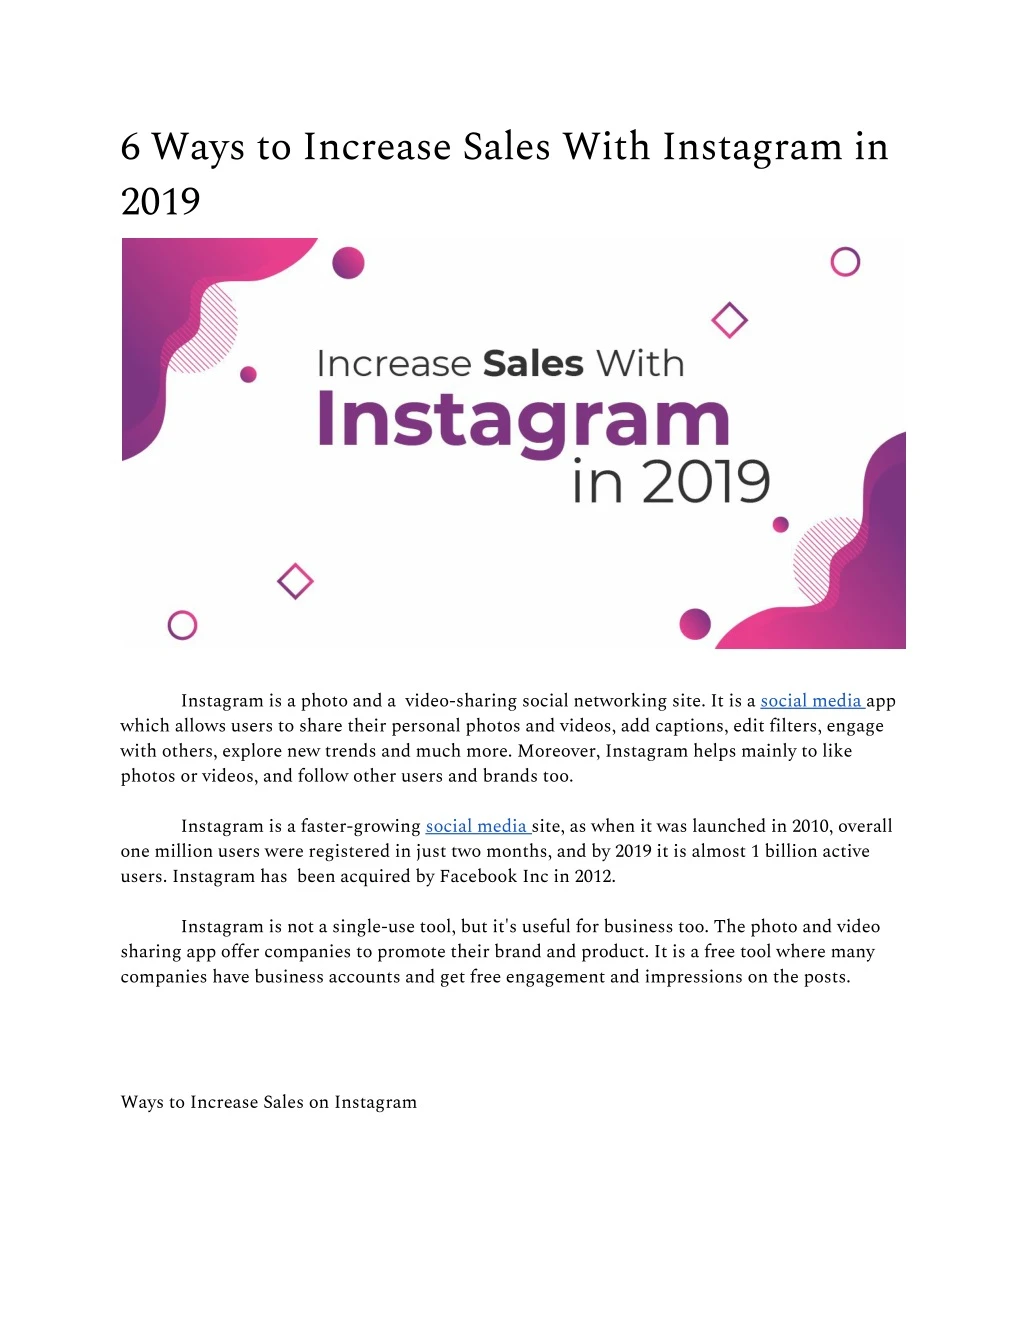 6 ways to increase sales with instagram in 2019